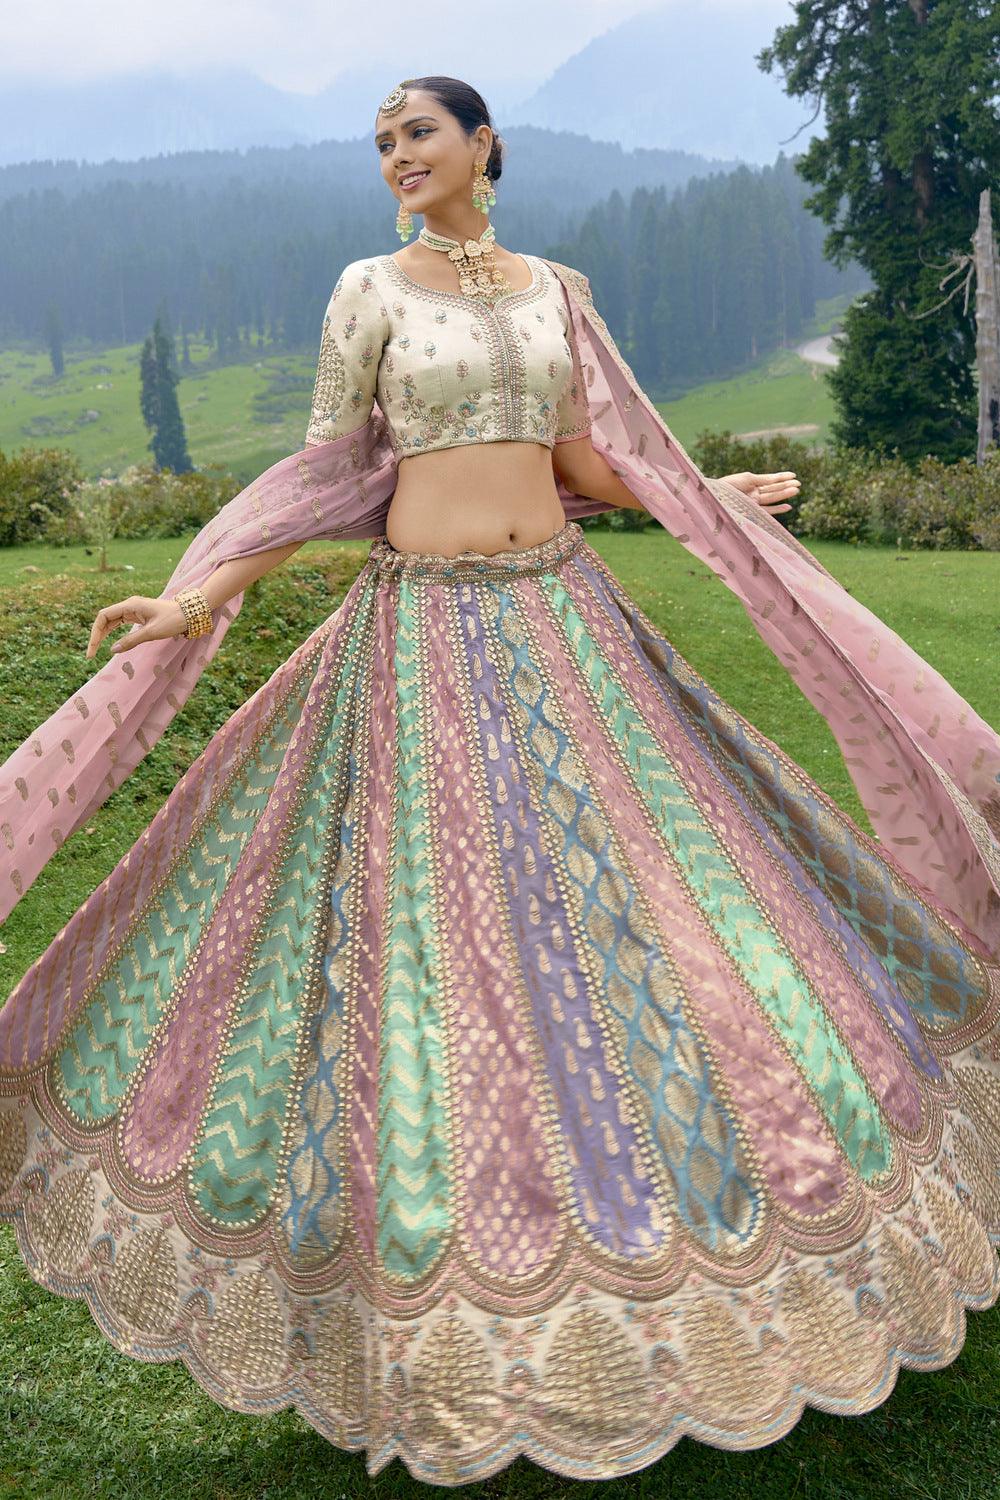 HOGSY Embroidered Semi Stitched Lehenga Choli - Buy HOGSY Embroidered Semi  Stitched Lehenga Choli Online at Best Prices in India | Flipkart.com